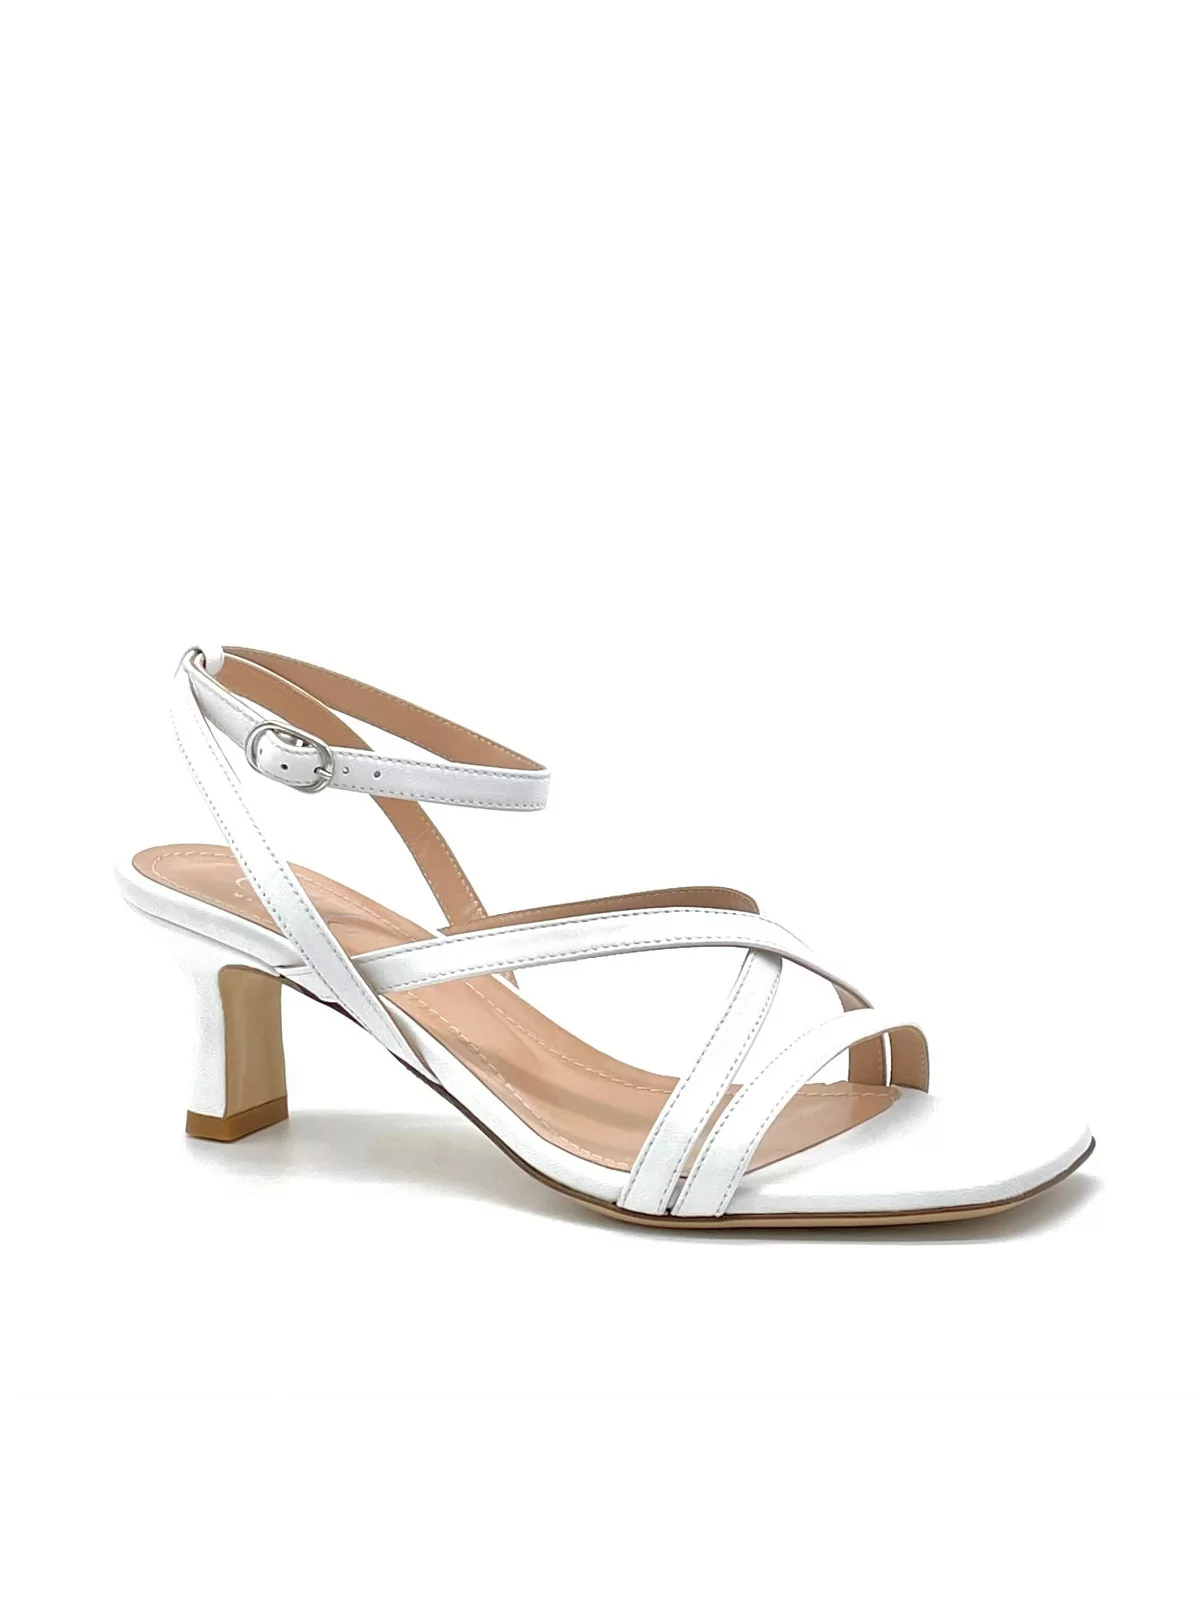 White leather sandal with ankle strap. Leather lining, leather sole. 5,5 cm heel